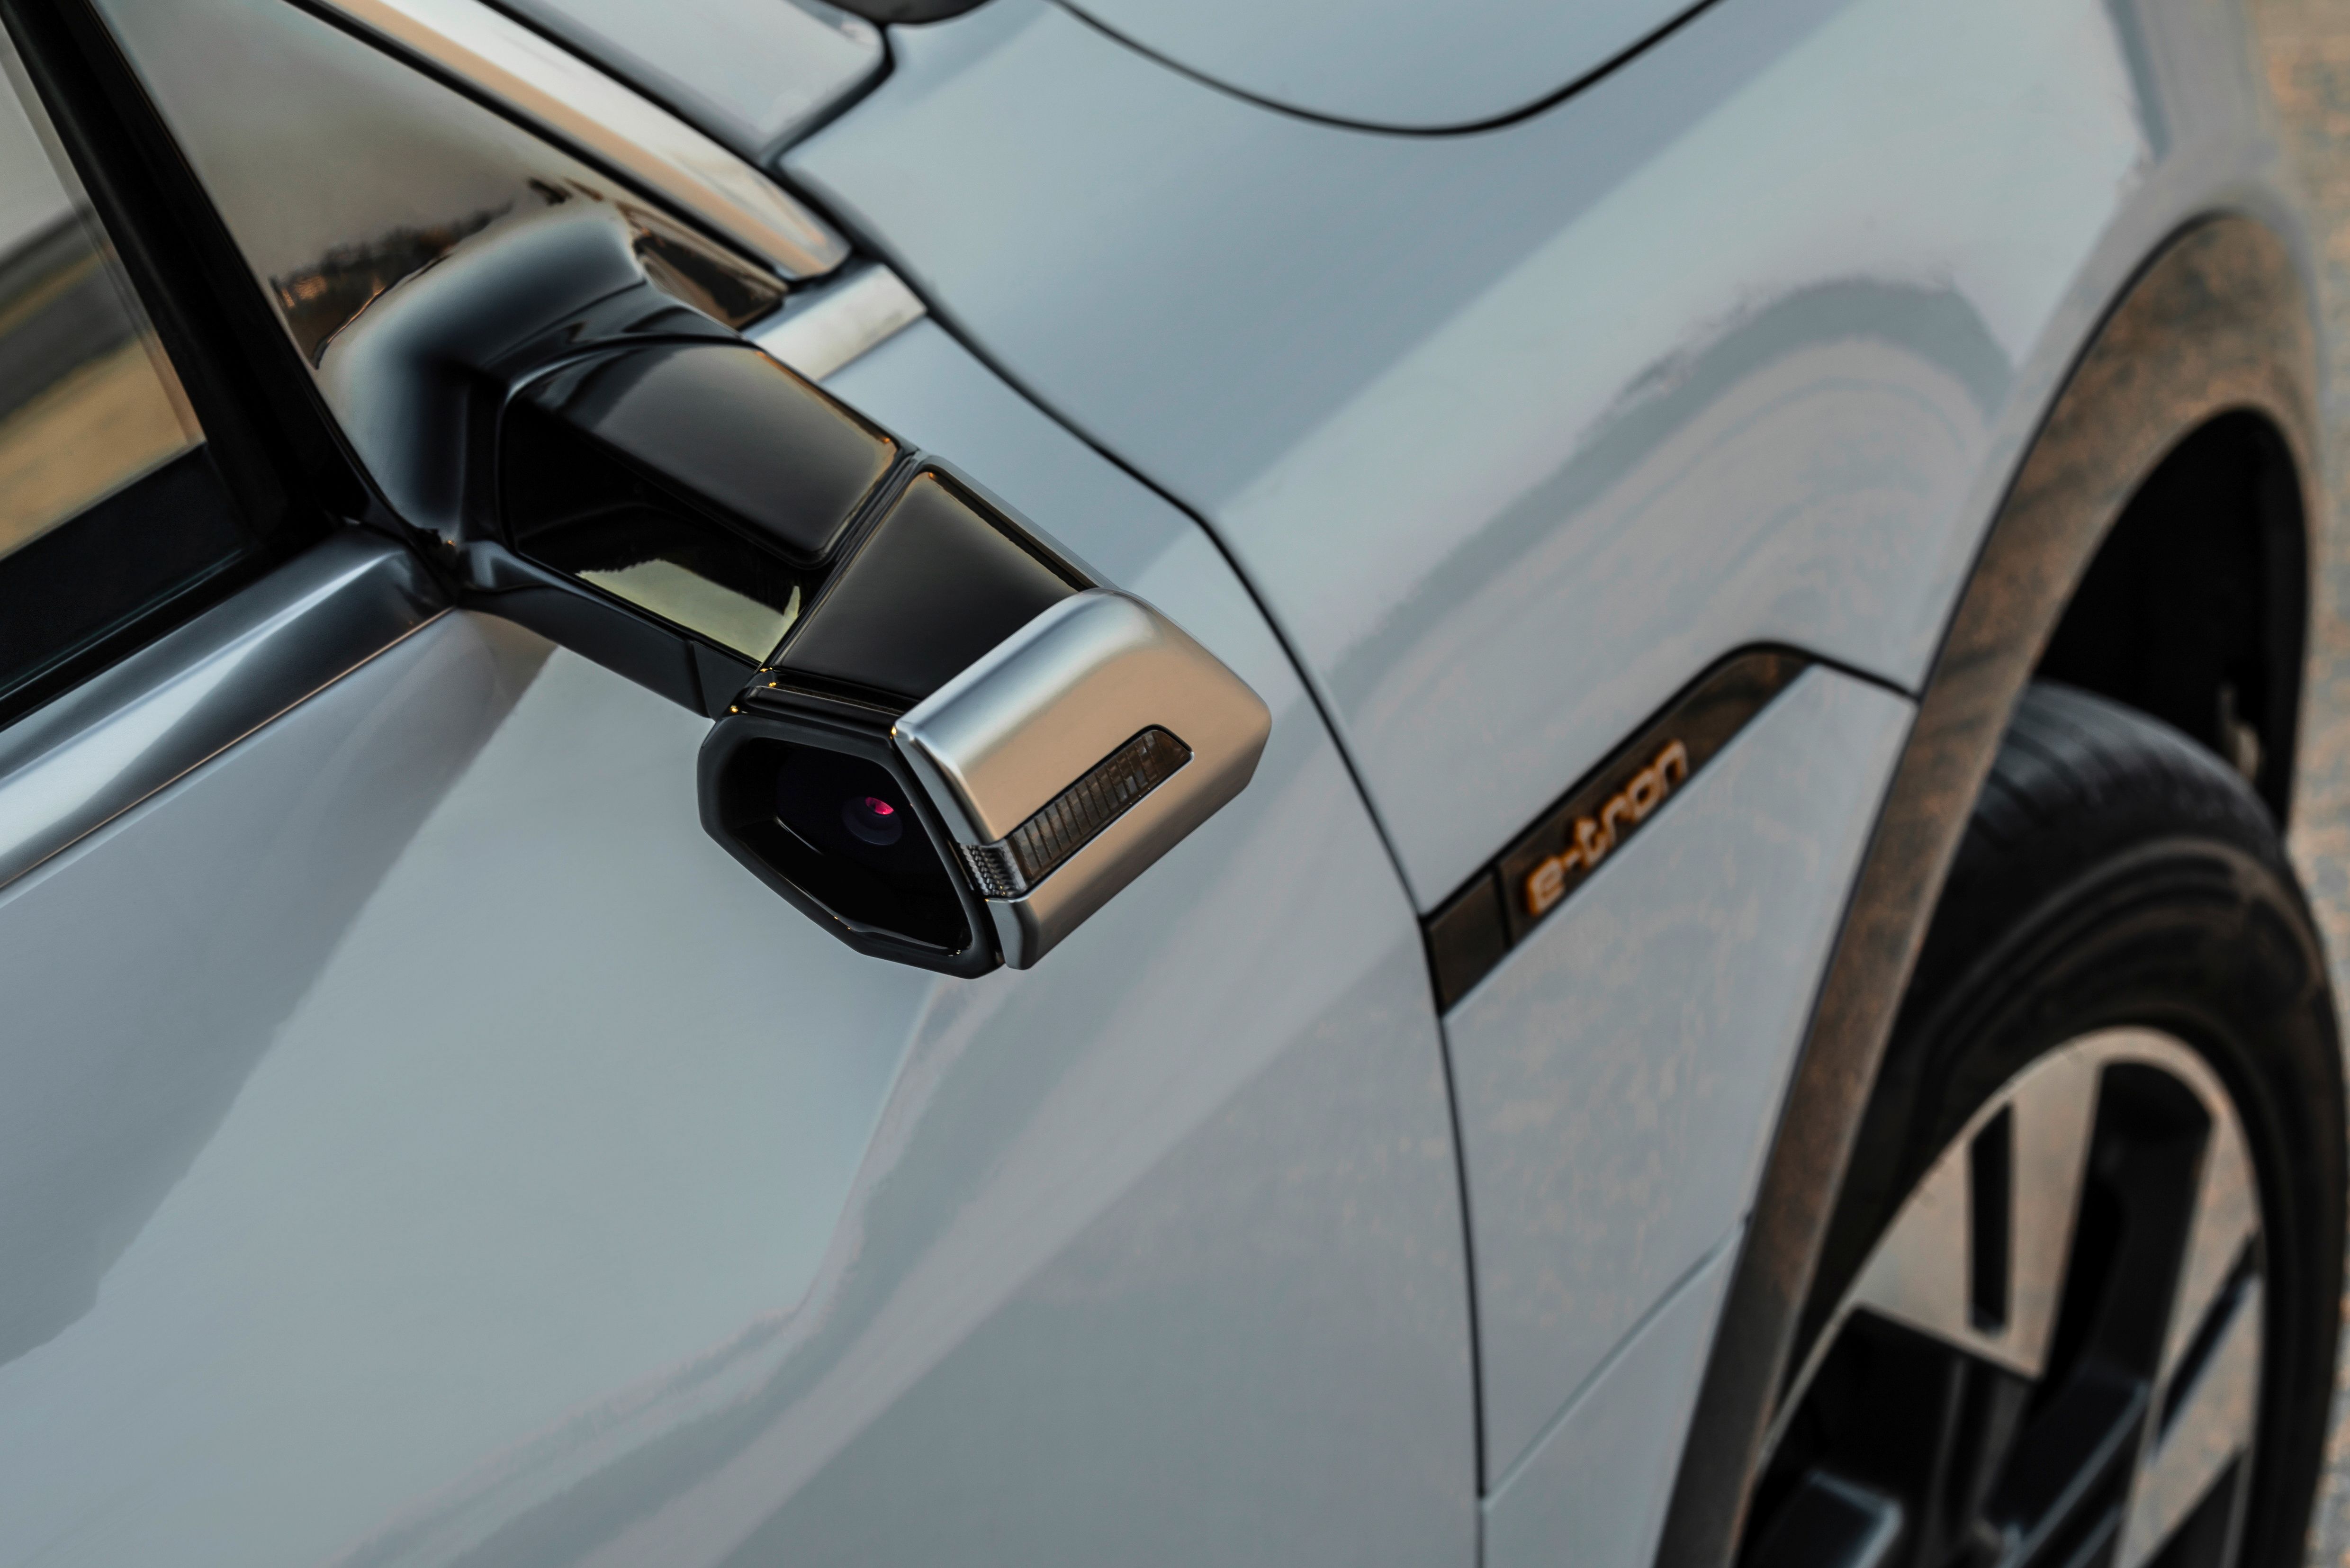 The rear-view camera mirrors on the e-tron